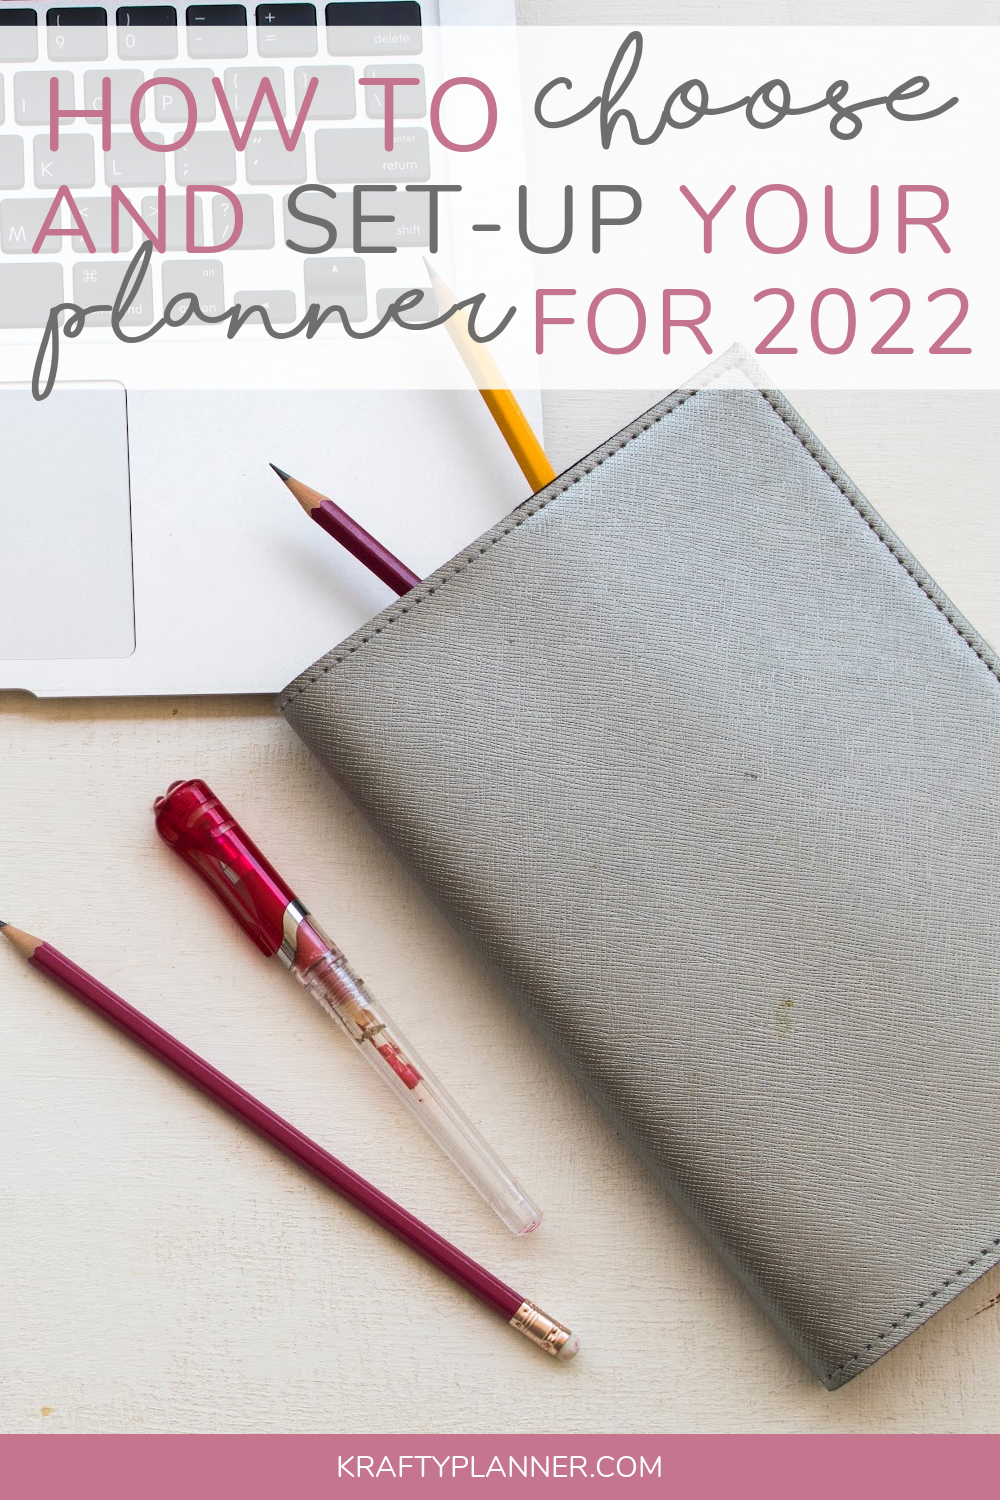 How To Organize and Set Up Your Planner for the New Year .png